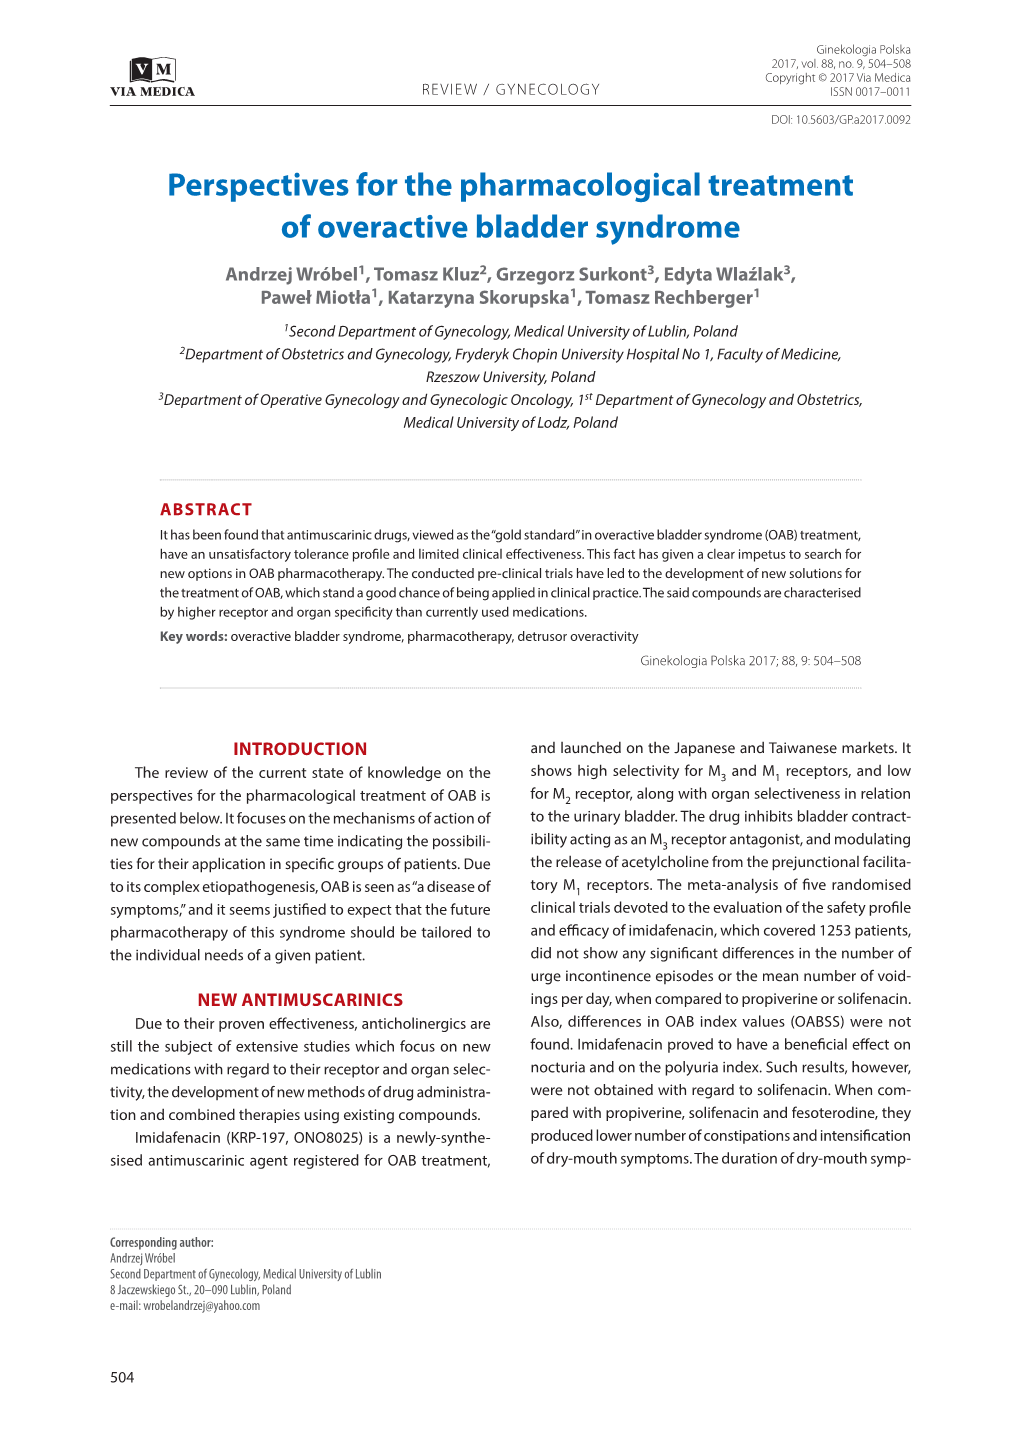 Perspectives for the Pharmacological Treatment of Overactive Bladder Syndrome